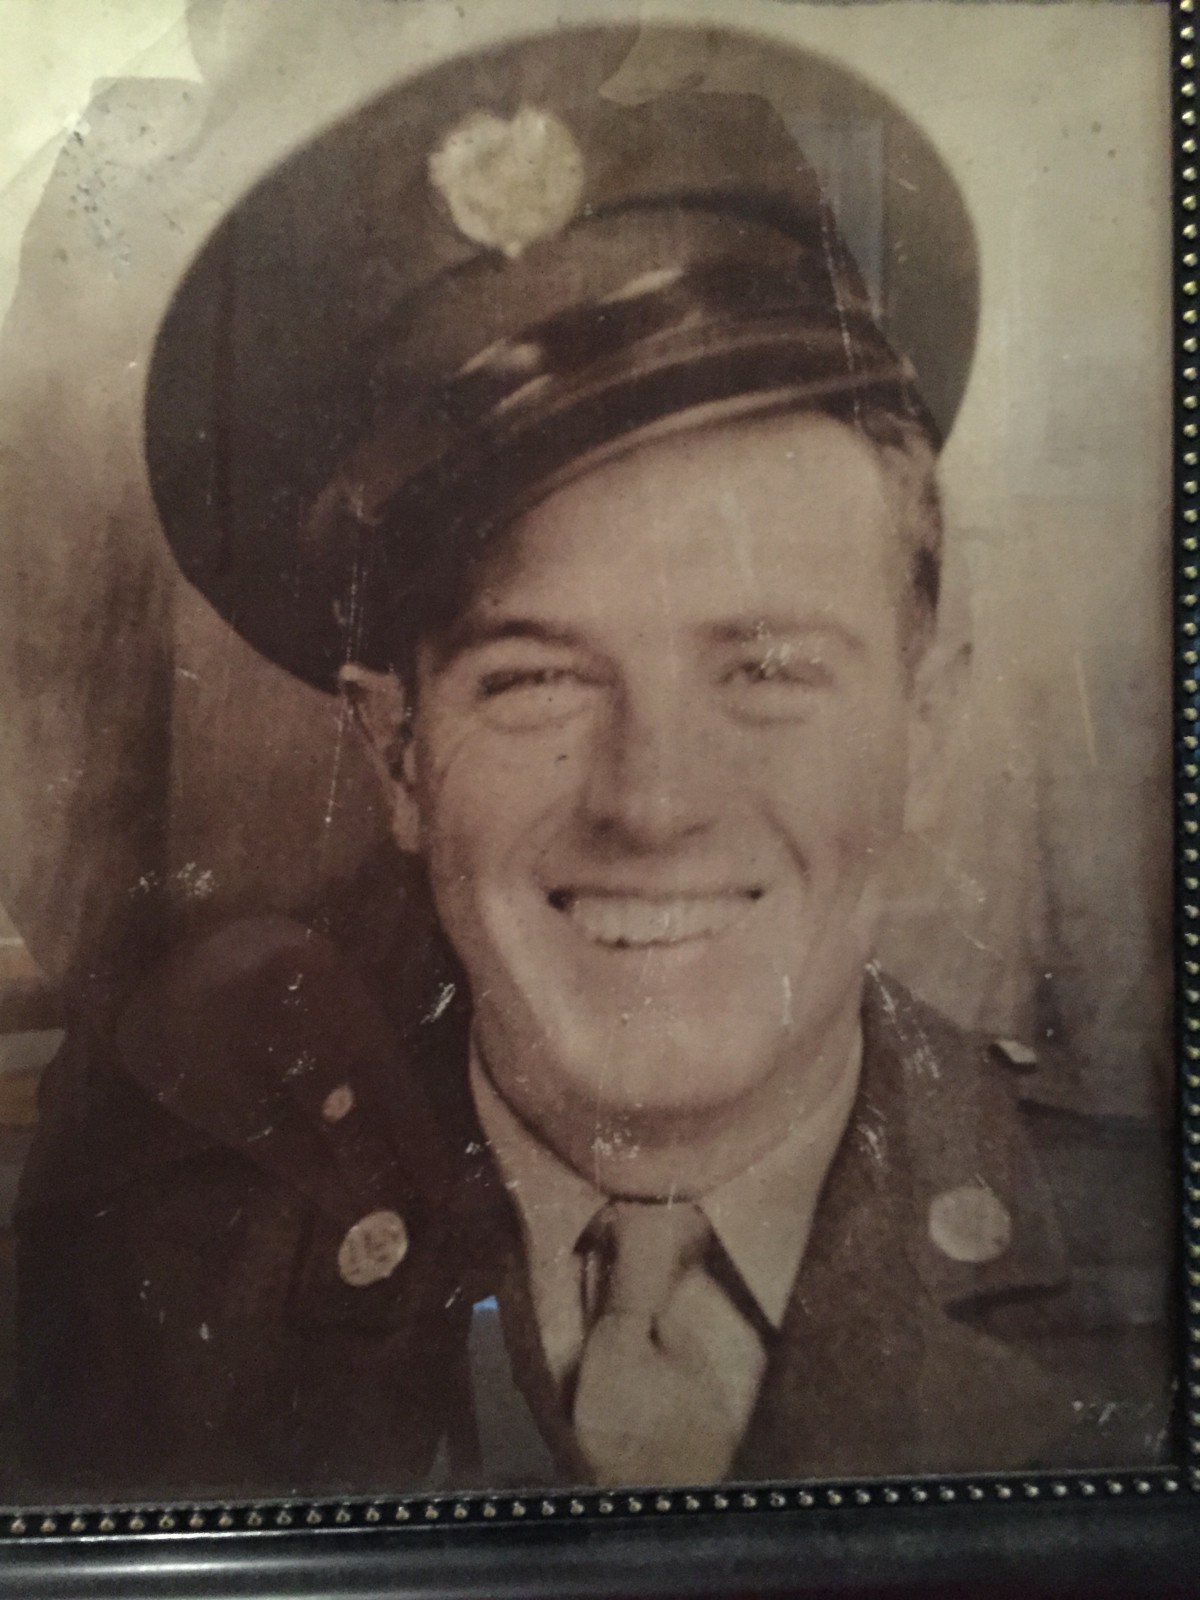 a photo of my grandfather in world war two